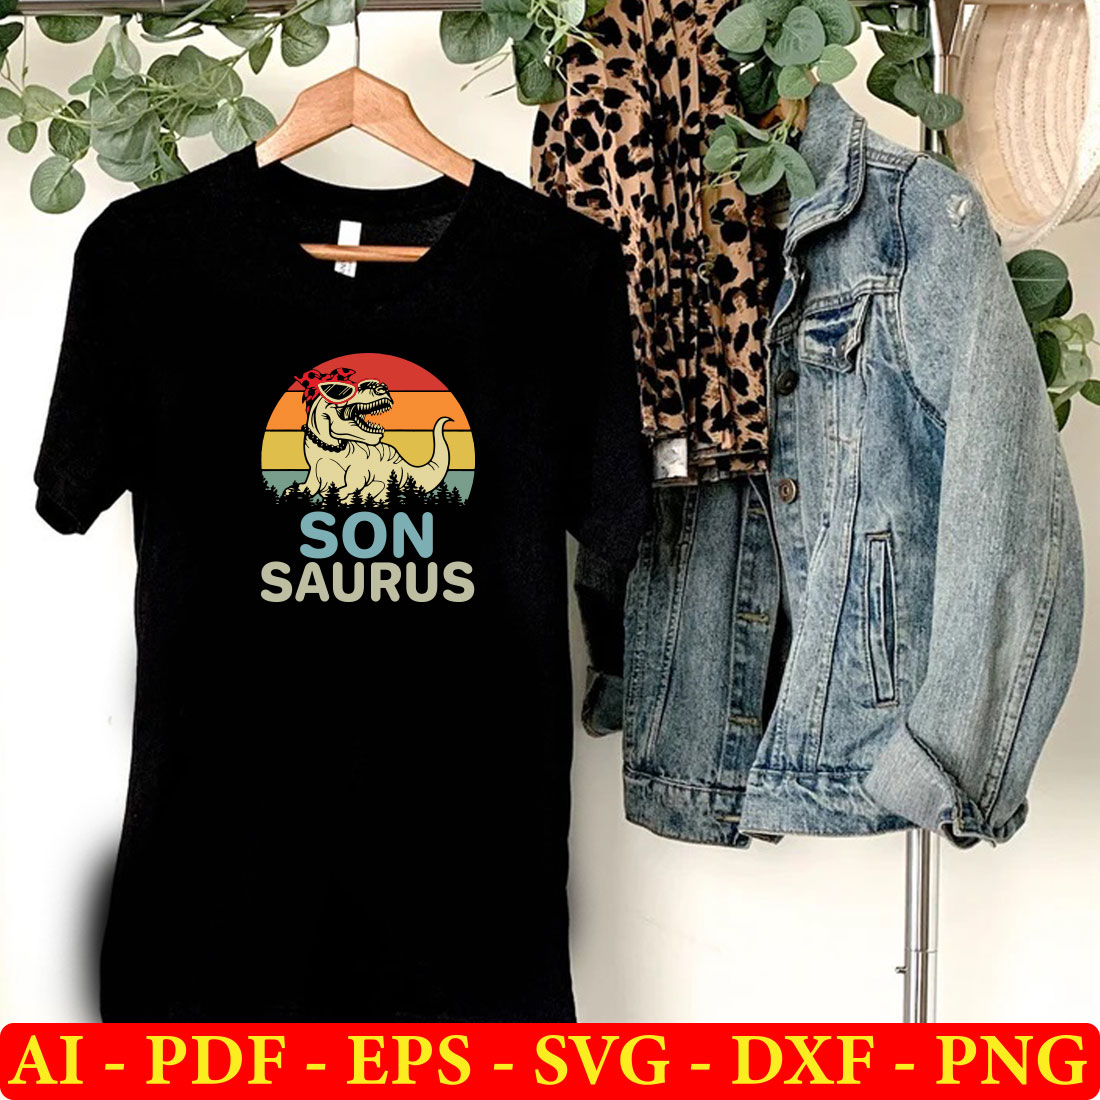 T - shirt that says son sauris on it next to a pair.